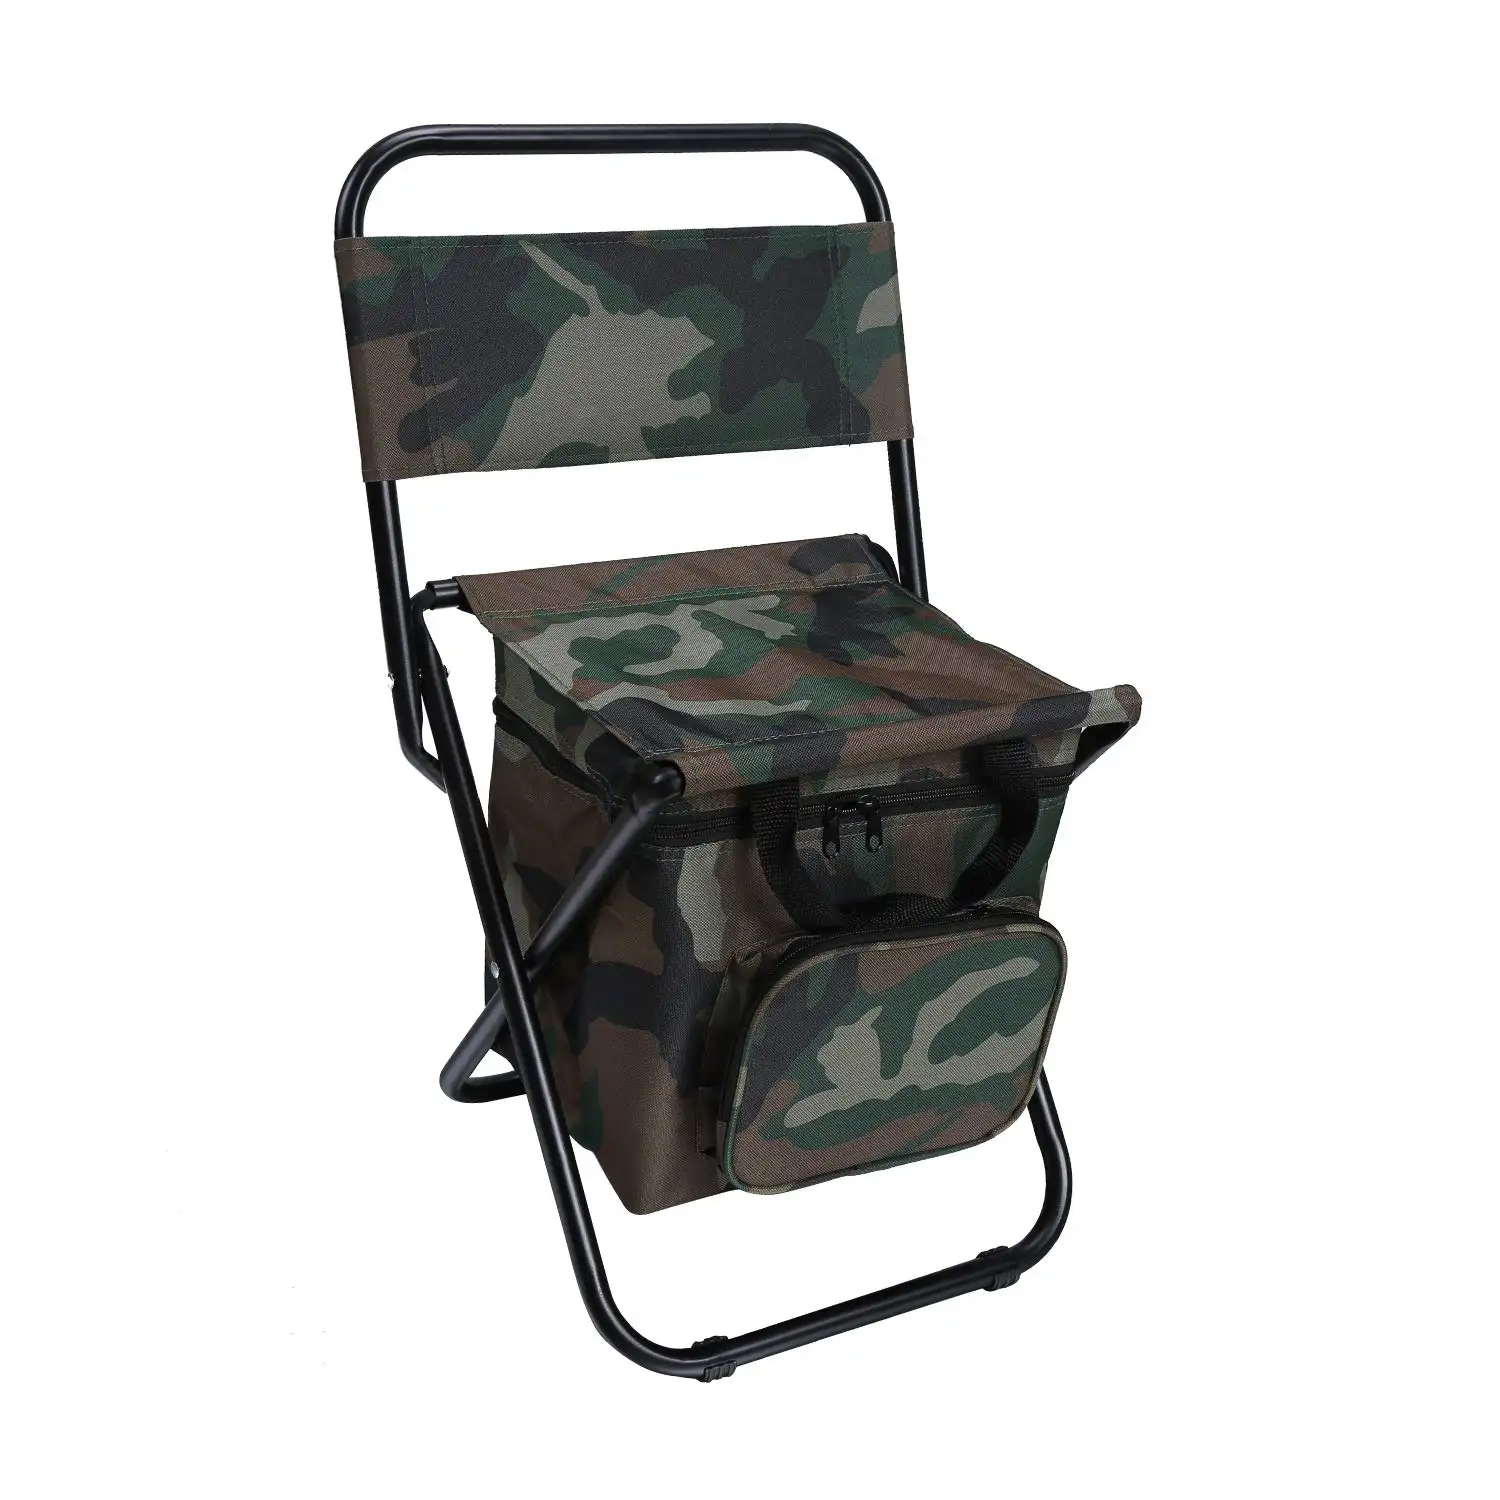 Cheap Portable folding camping chair with cooler bag compact fishing stool camouflage fishing chair camping